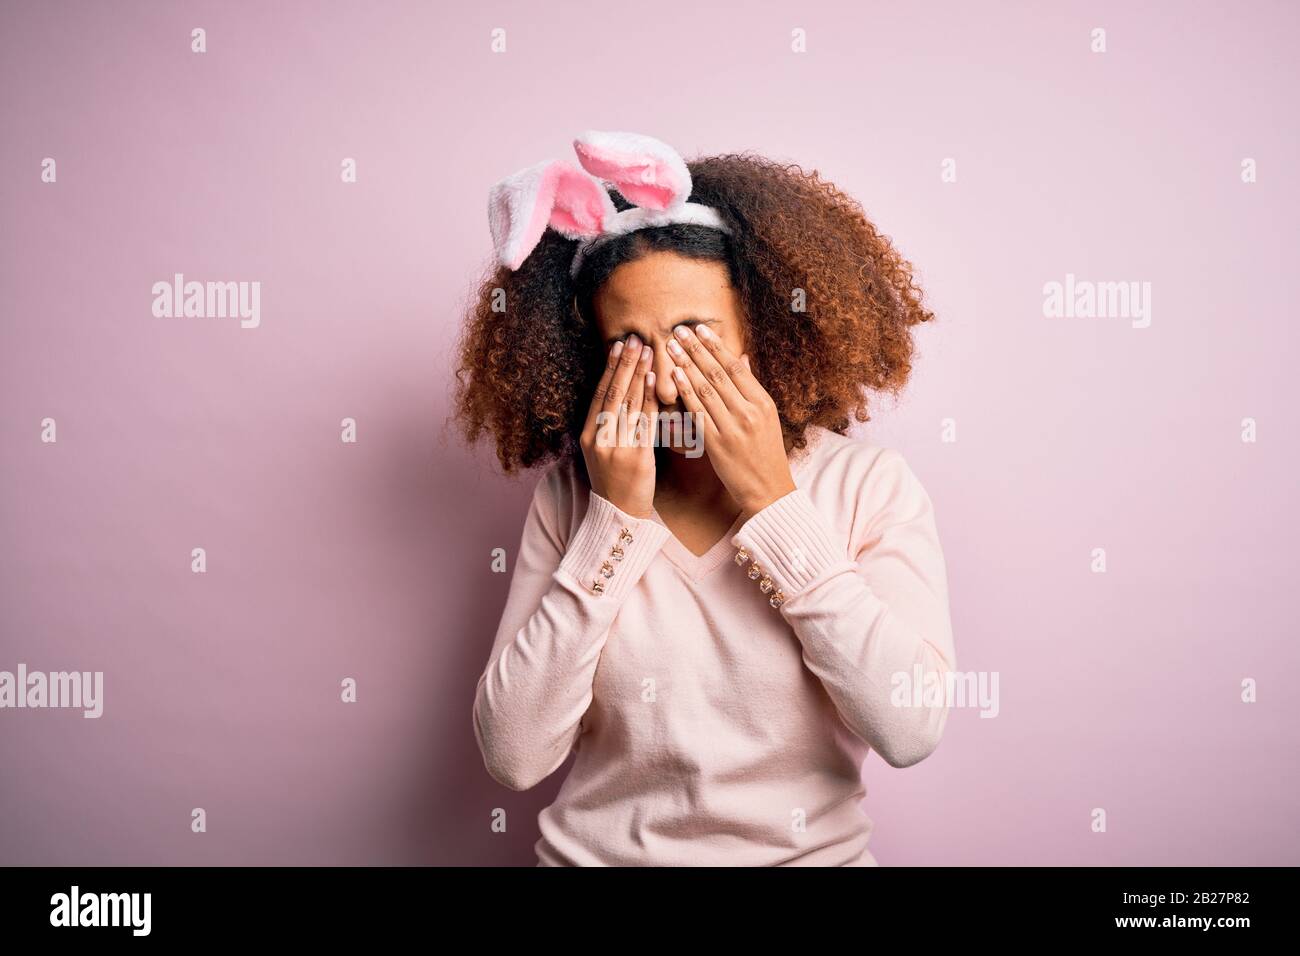 Young african american woman with afro hair wearing bunny ears over pink background rubbing eyes for fatigue and headache, sleepy and tired expression Stock Photo